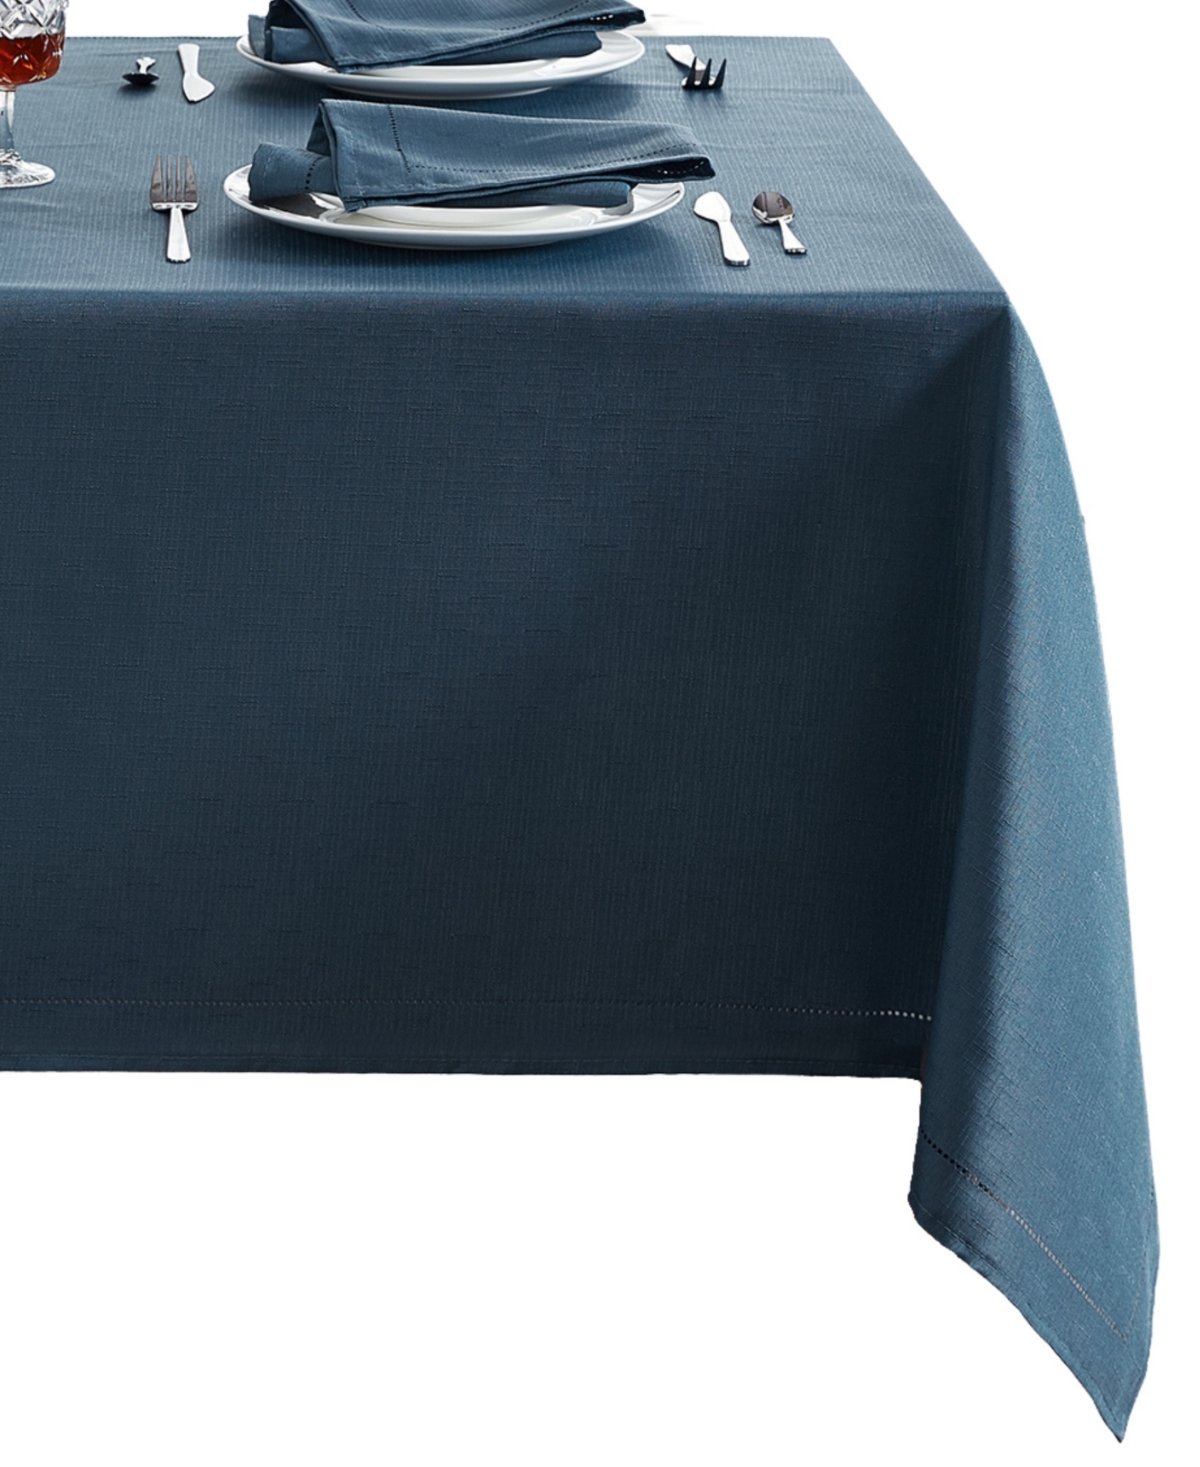 Elrene Alison Eyelet Punched Border Fabric Tablecloth, 60" X 84" In Copen Blue